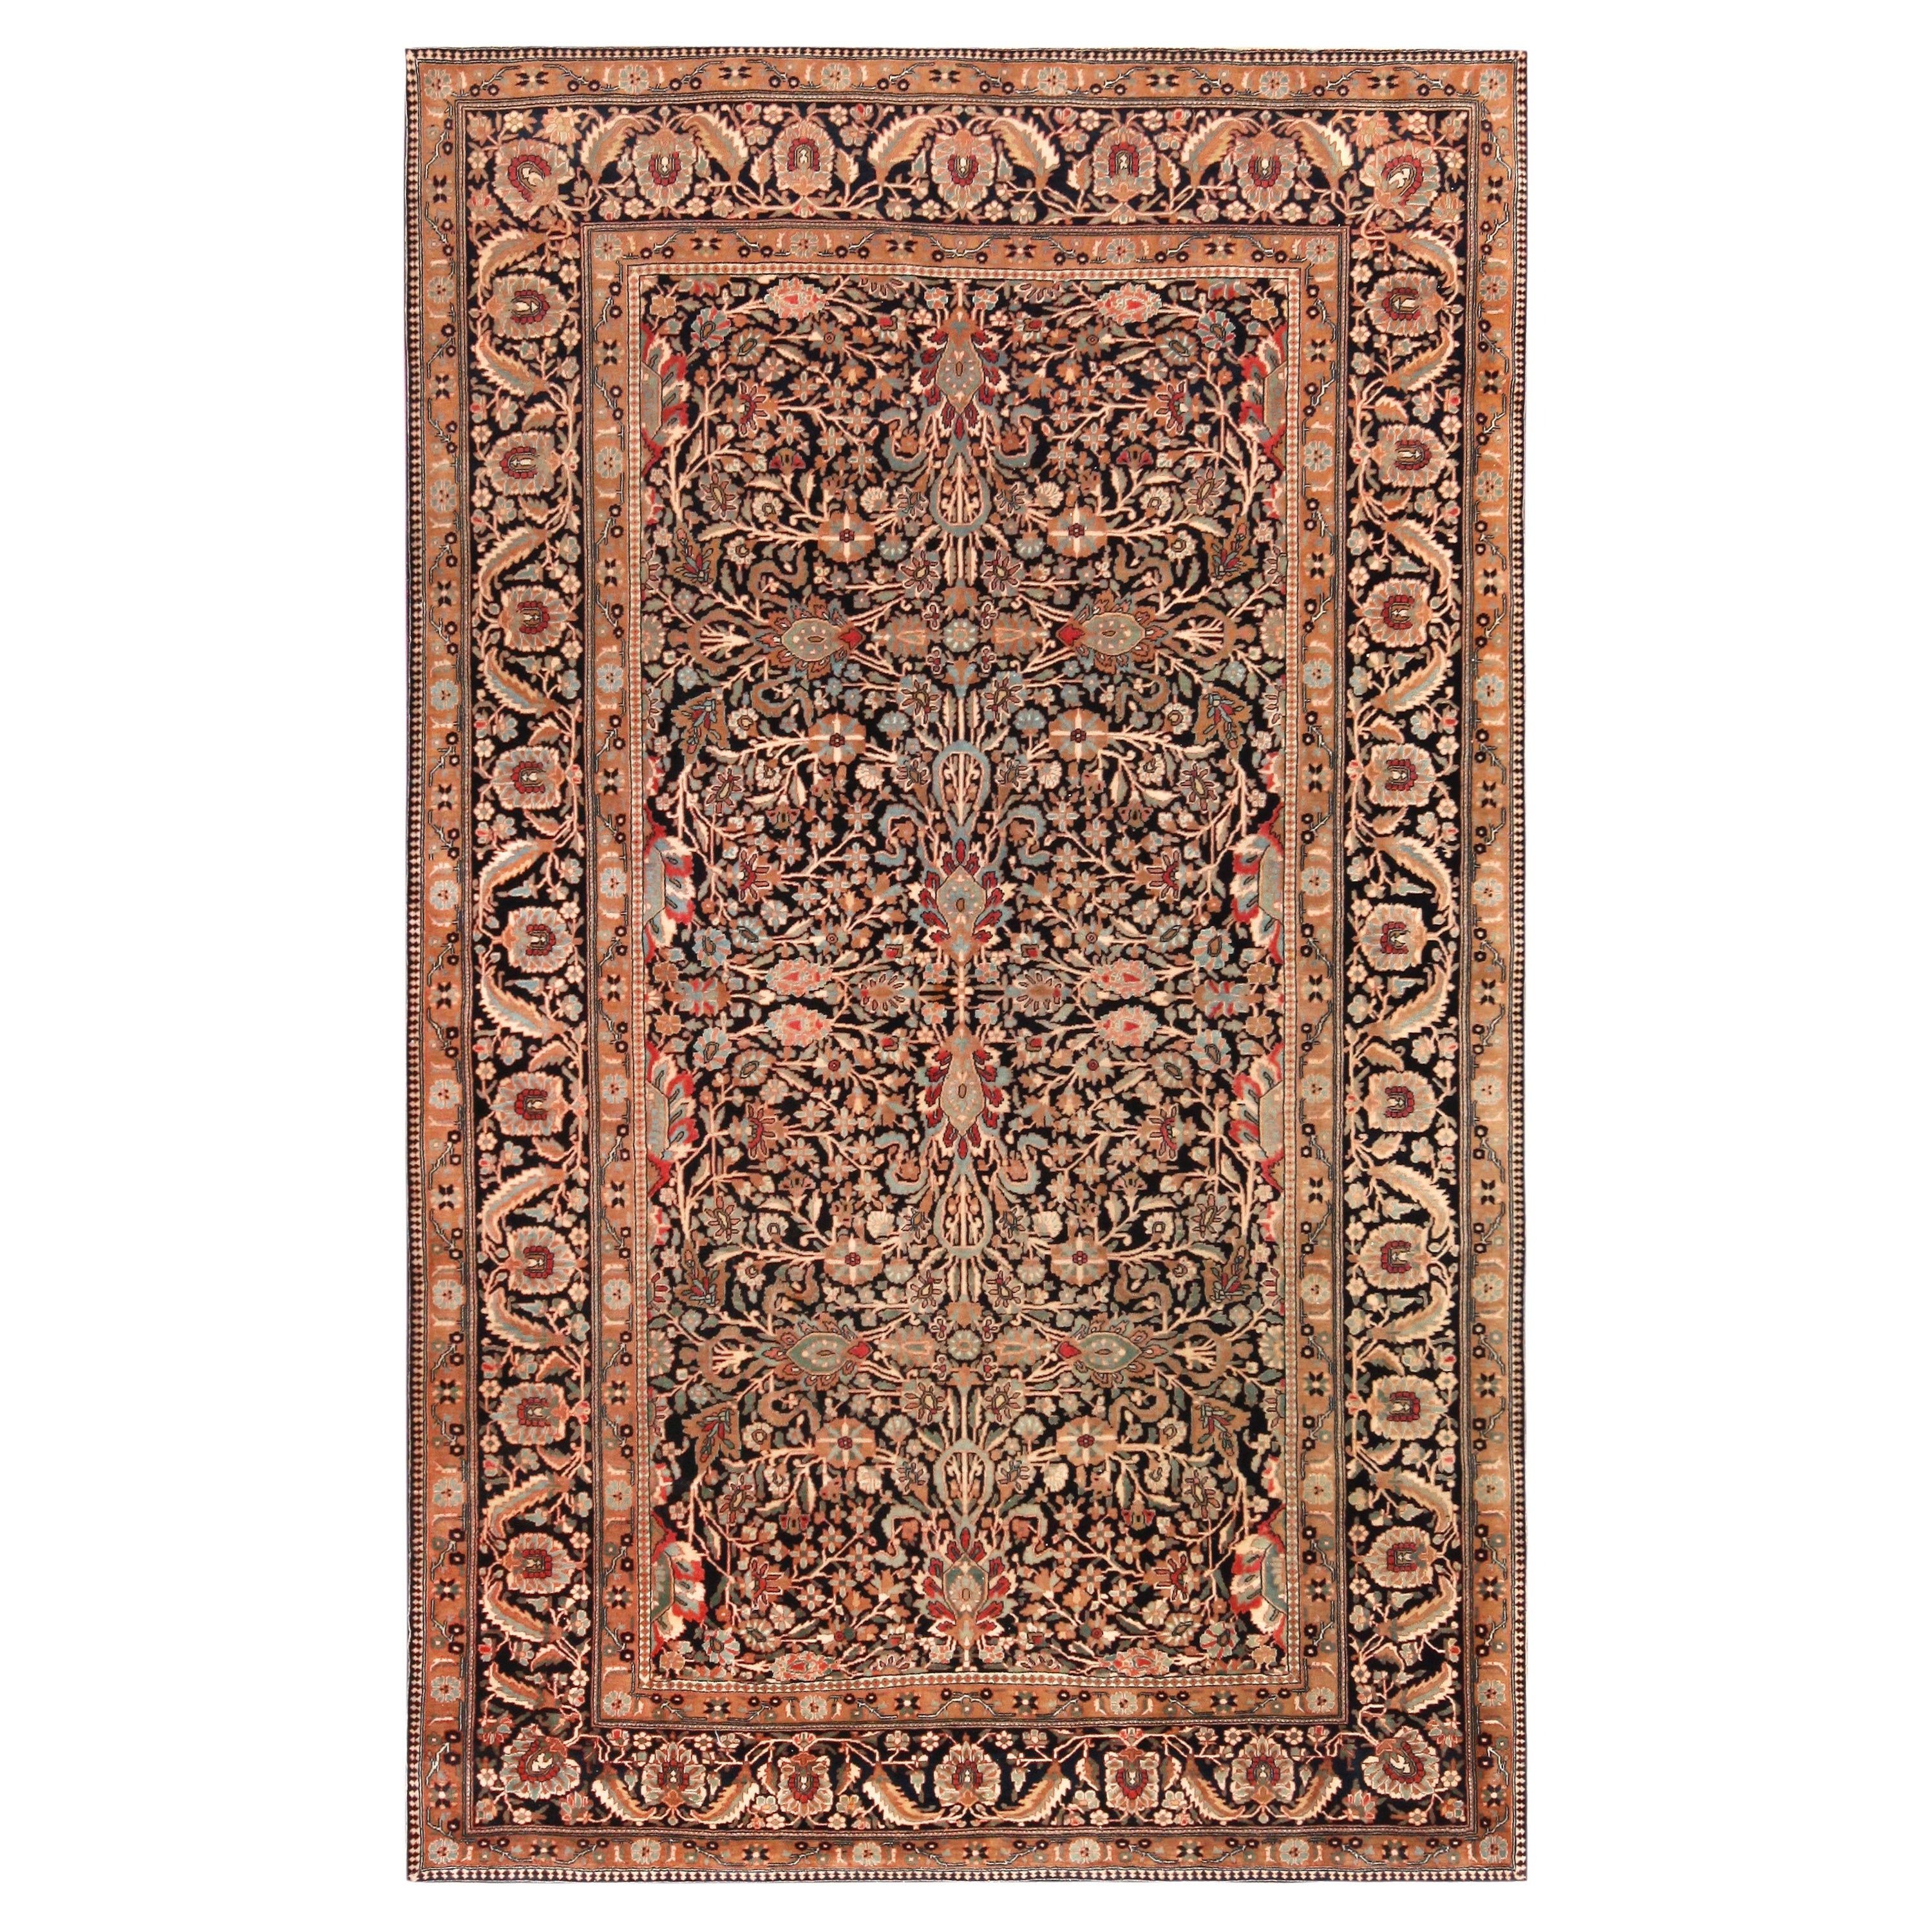 Nazmiyal Collection Antique Persian Mohtasham Kashan Rug. 4 ft 4 in x 6 ft 10 in